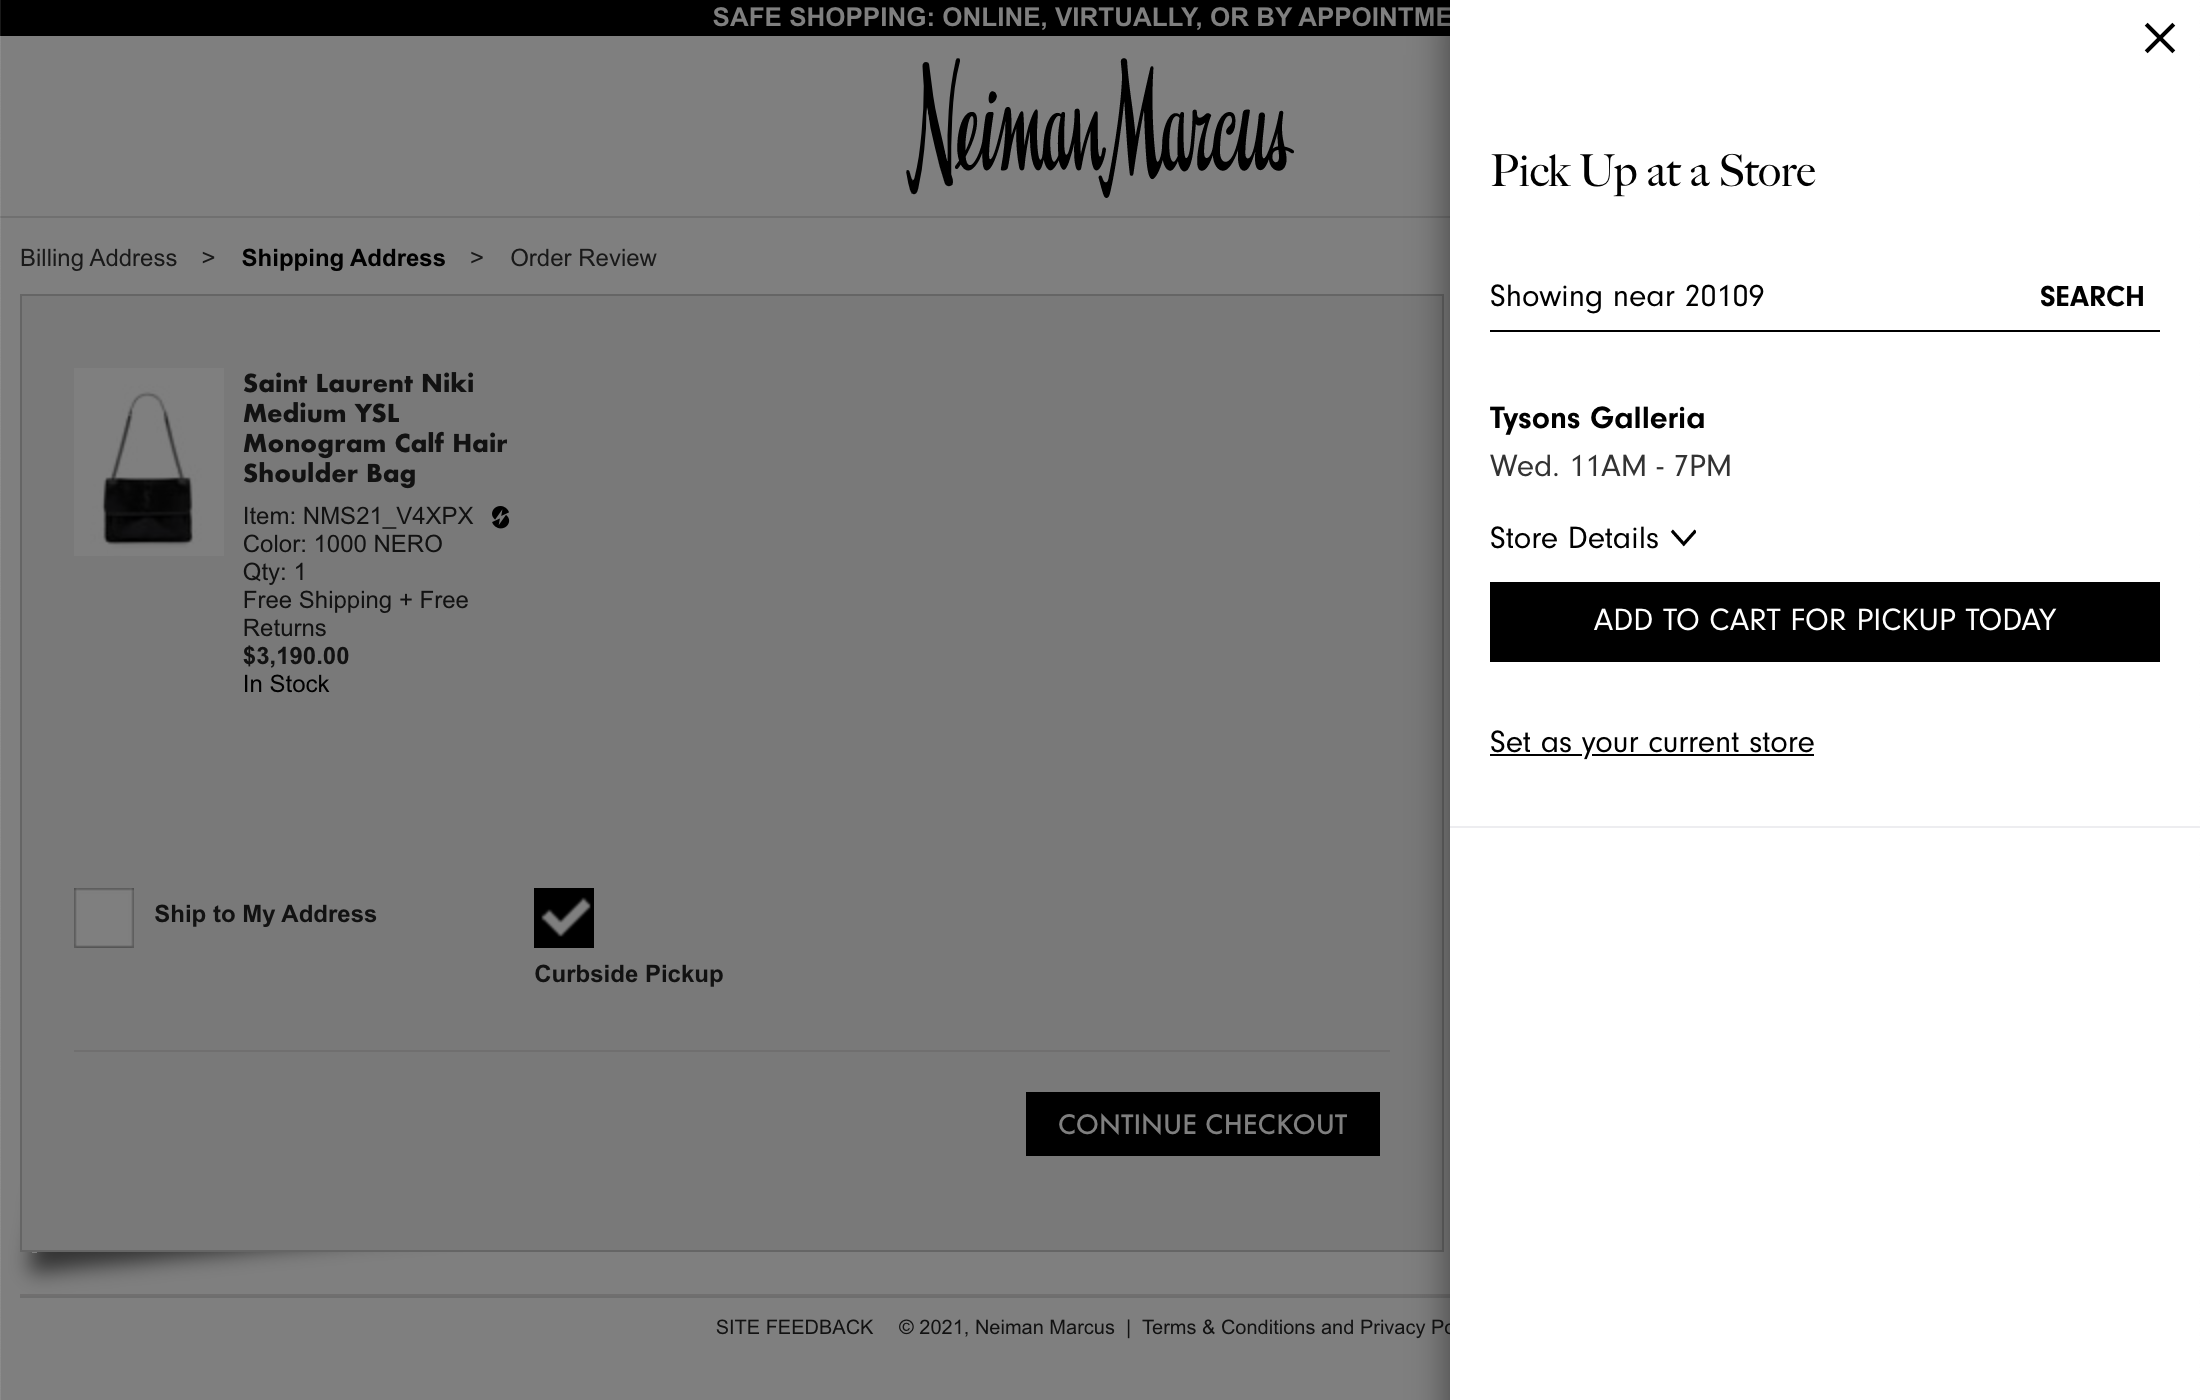 In-Store Pickup at Neiman Marcus